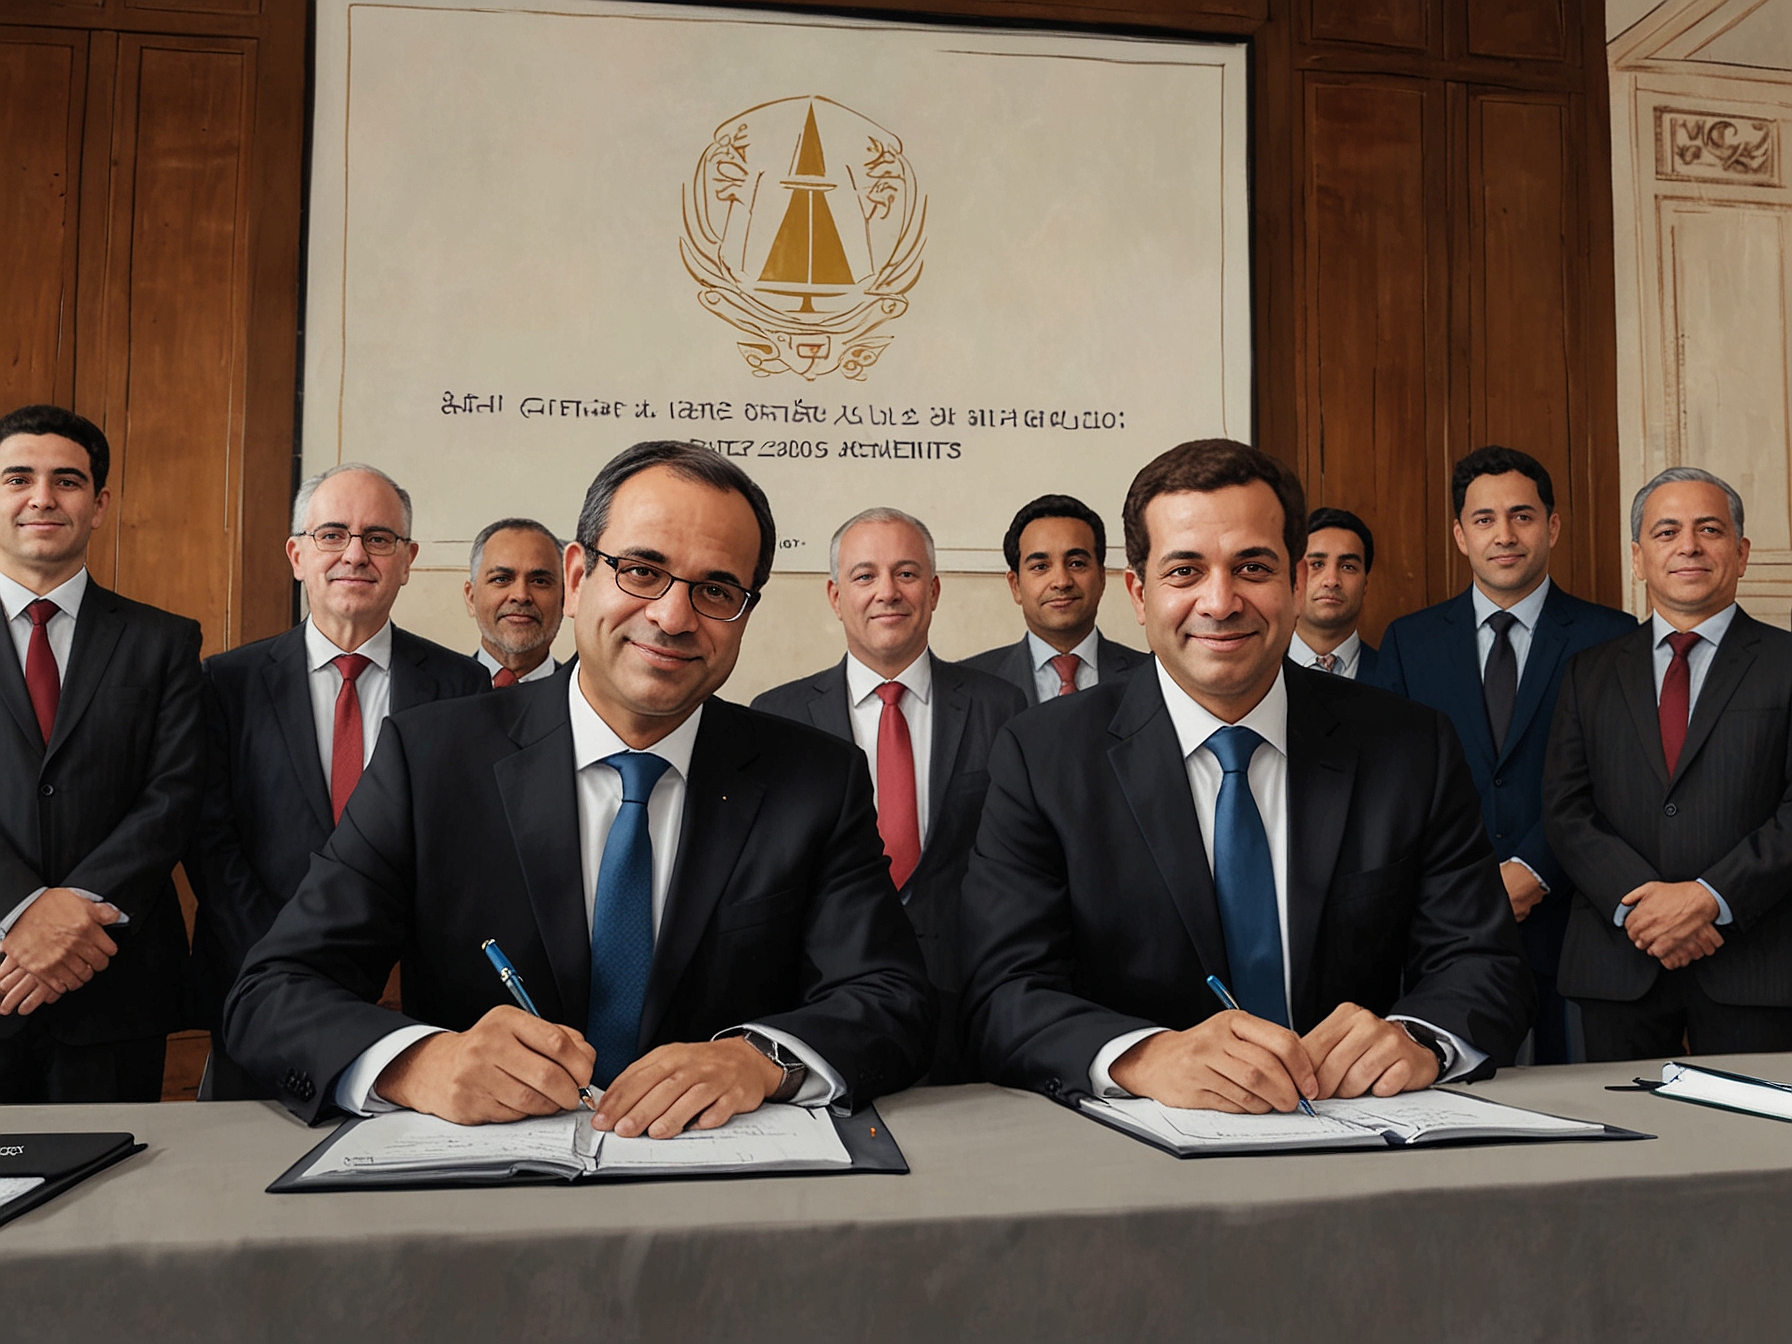 Representatives from Egypt and European companies sign Memorandums of Understanding (MoUs) at the conclusion of the conference, marking new bilateral investment agreements targeting various strategic sectors.